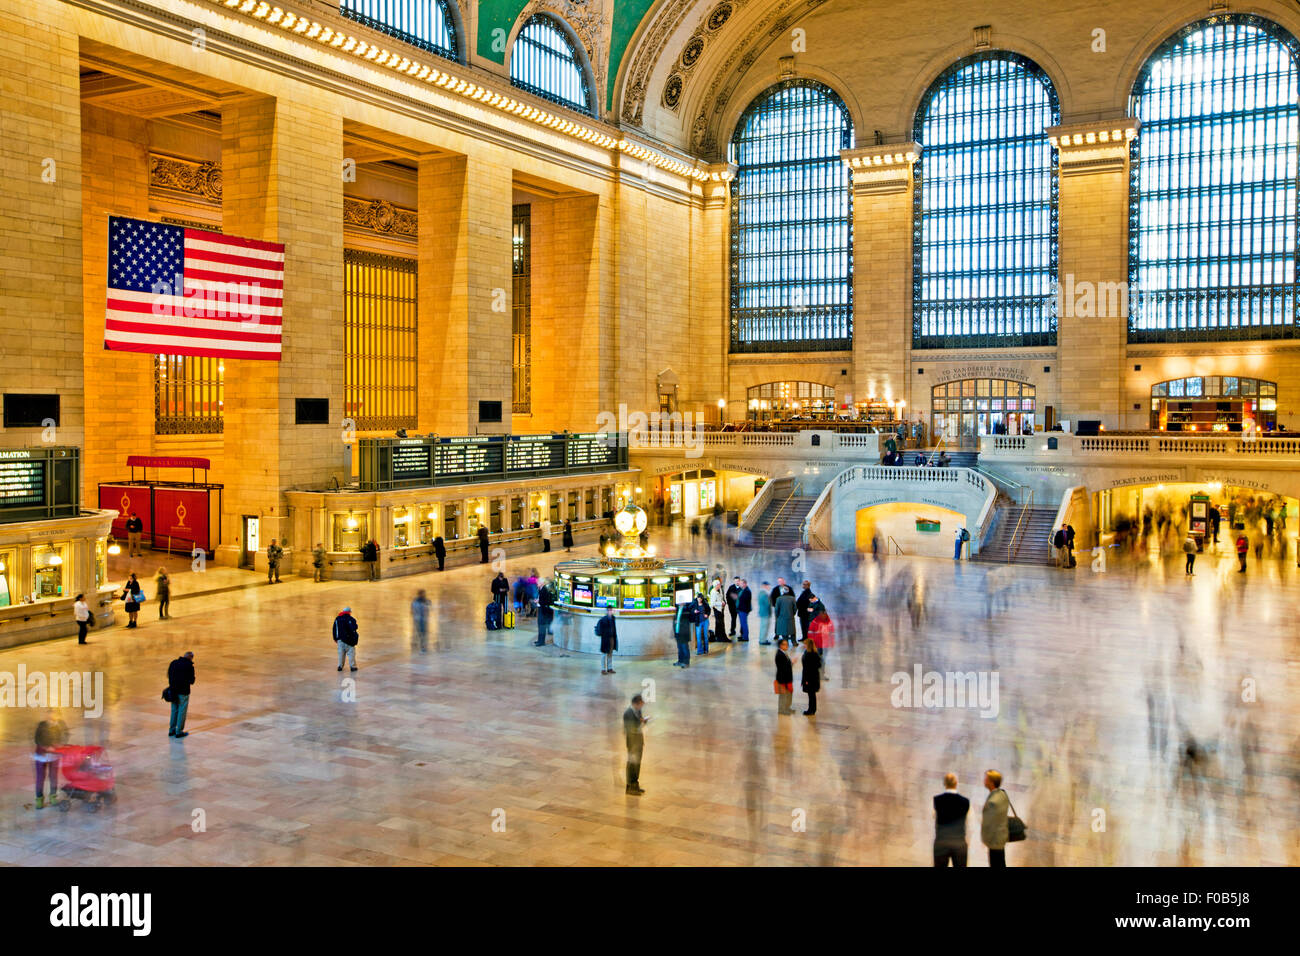 NEW YORK, USA - NOVEMBER 13th, 2014: The interior of New York's Grand Central station full of commuters long exposure. Stock Photo